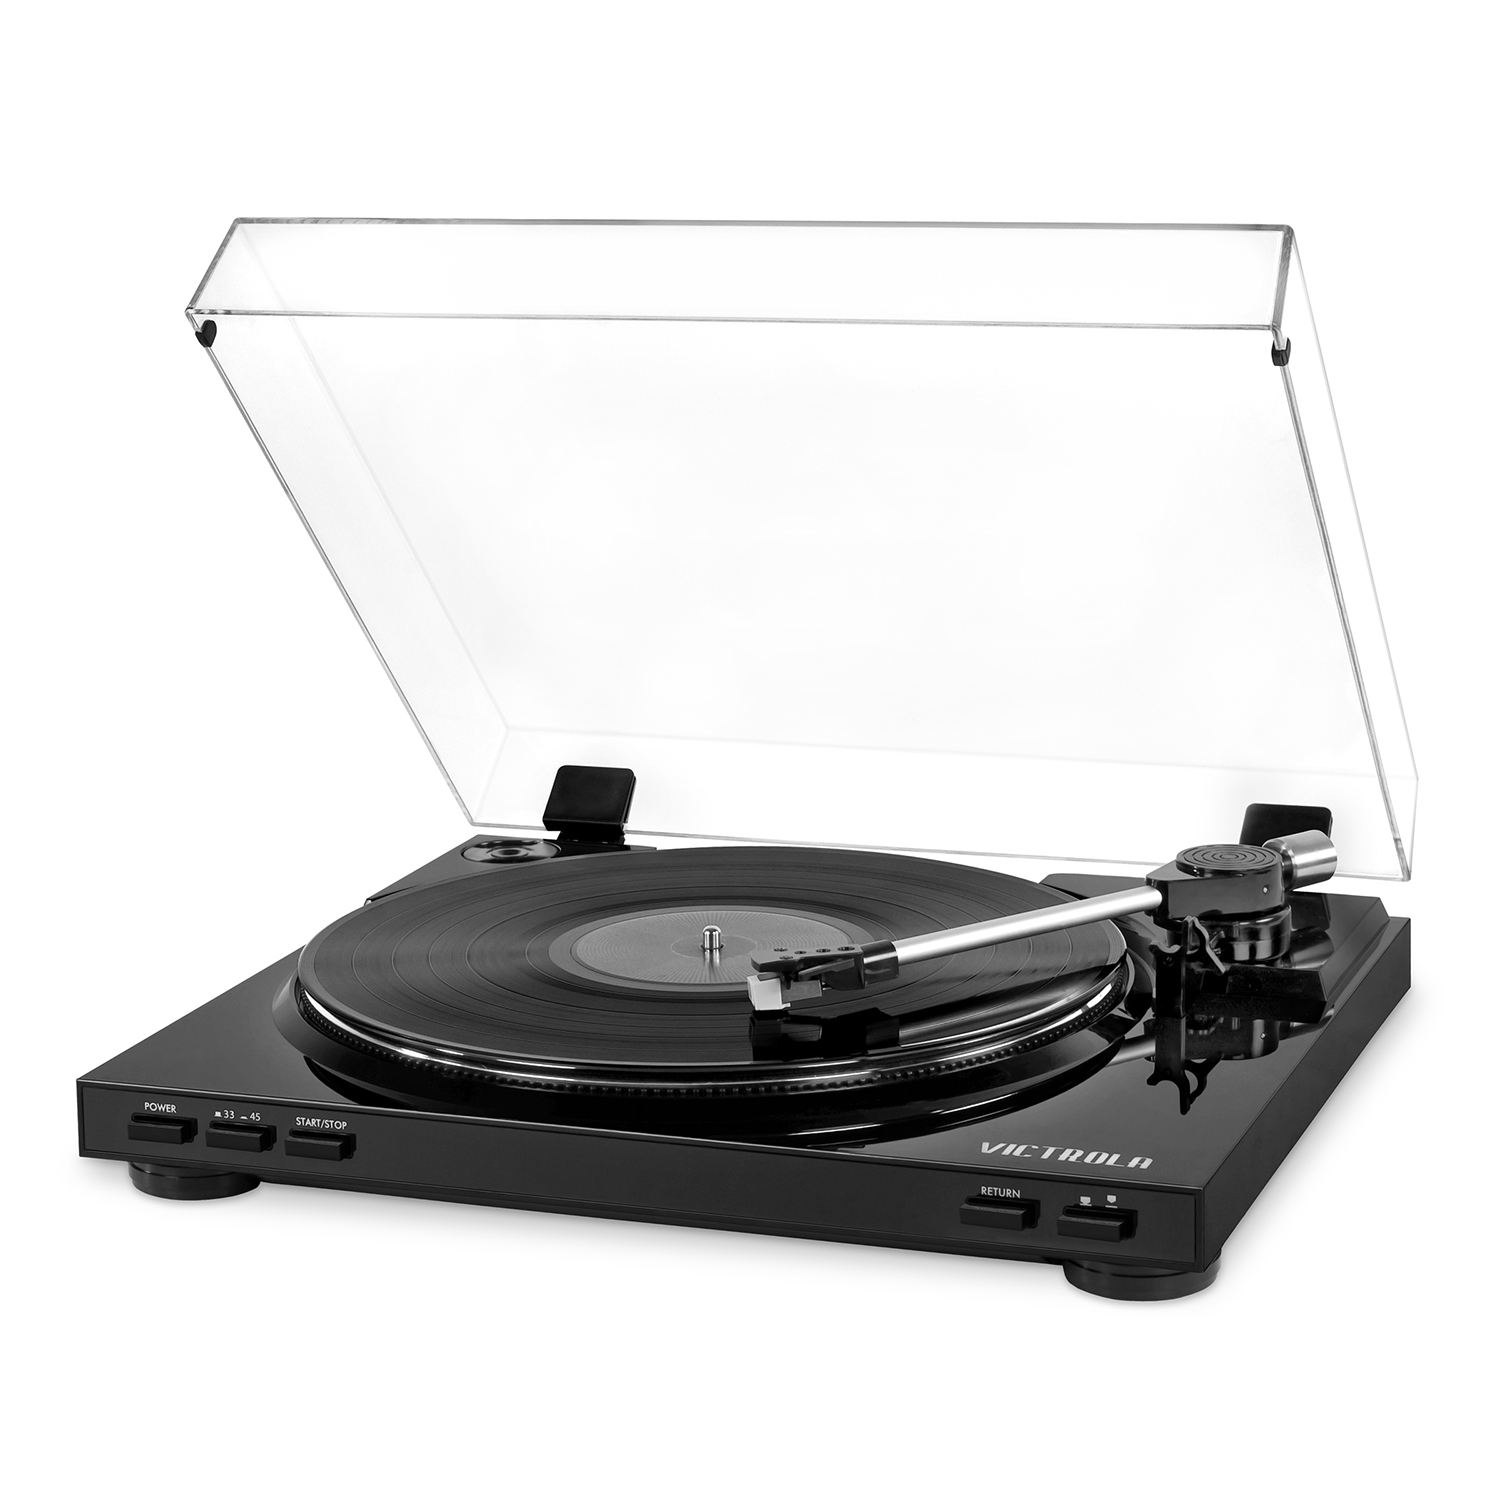 Victrola Pro USB Record Player with 2-Speed Turntable and Dust Cover - Black - image 1 of 3